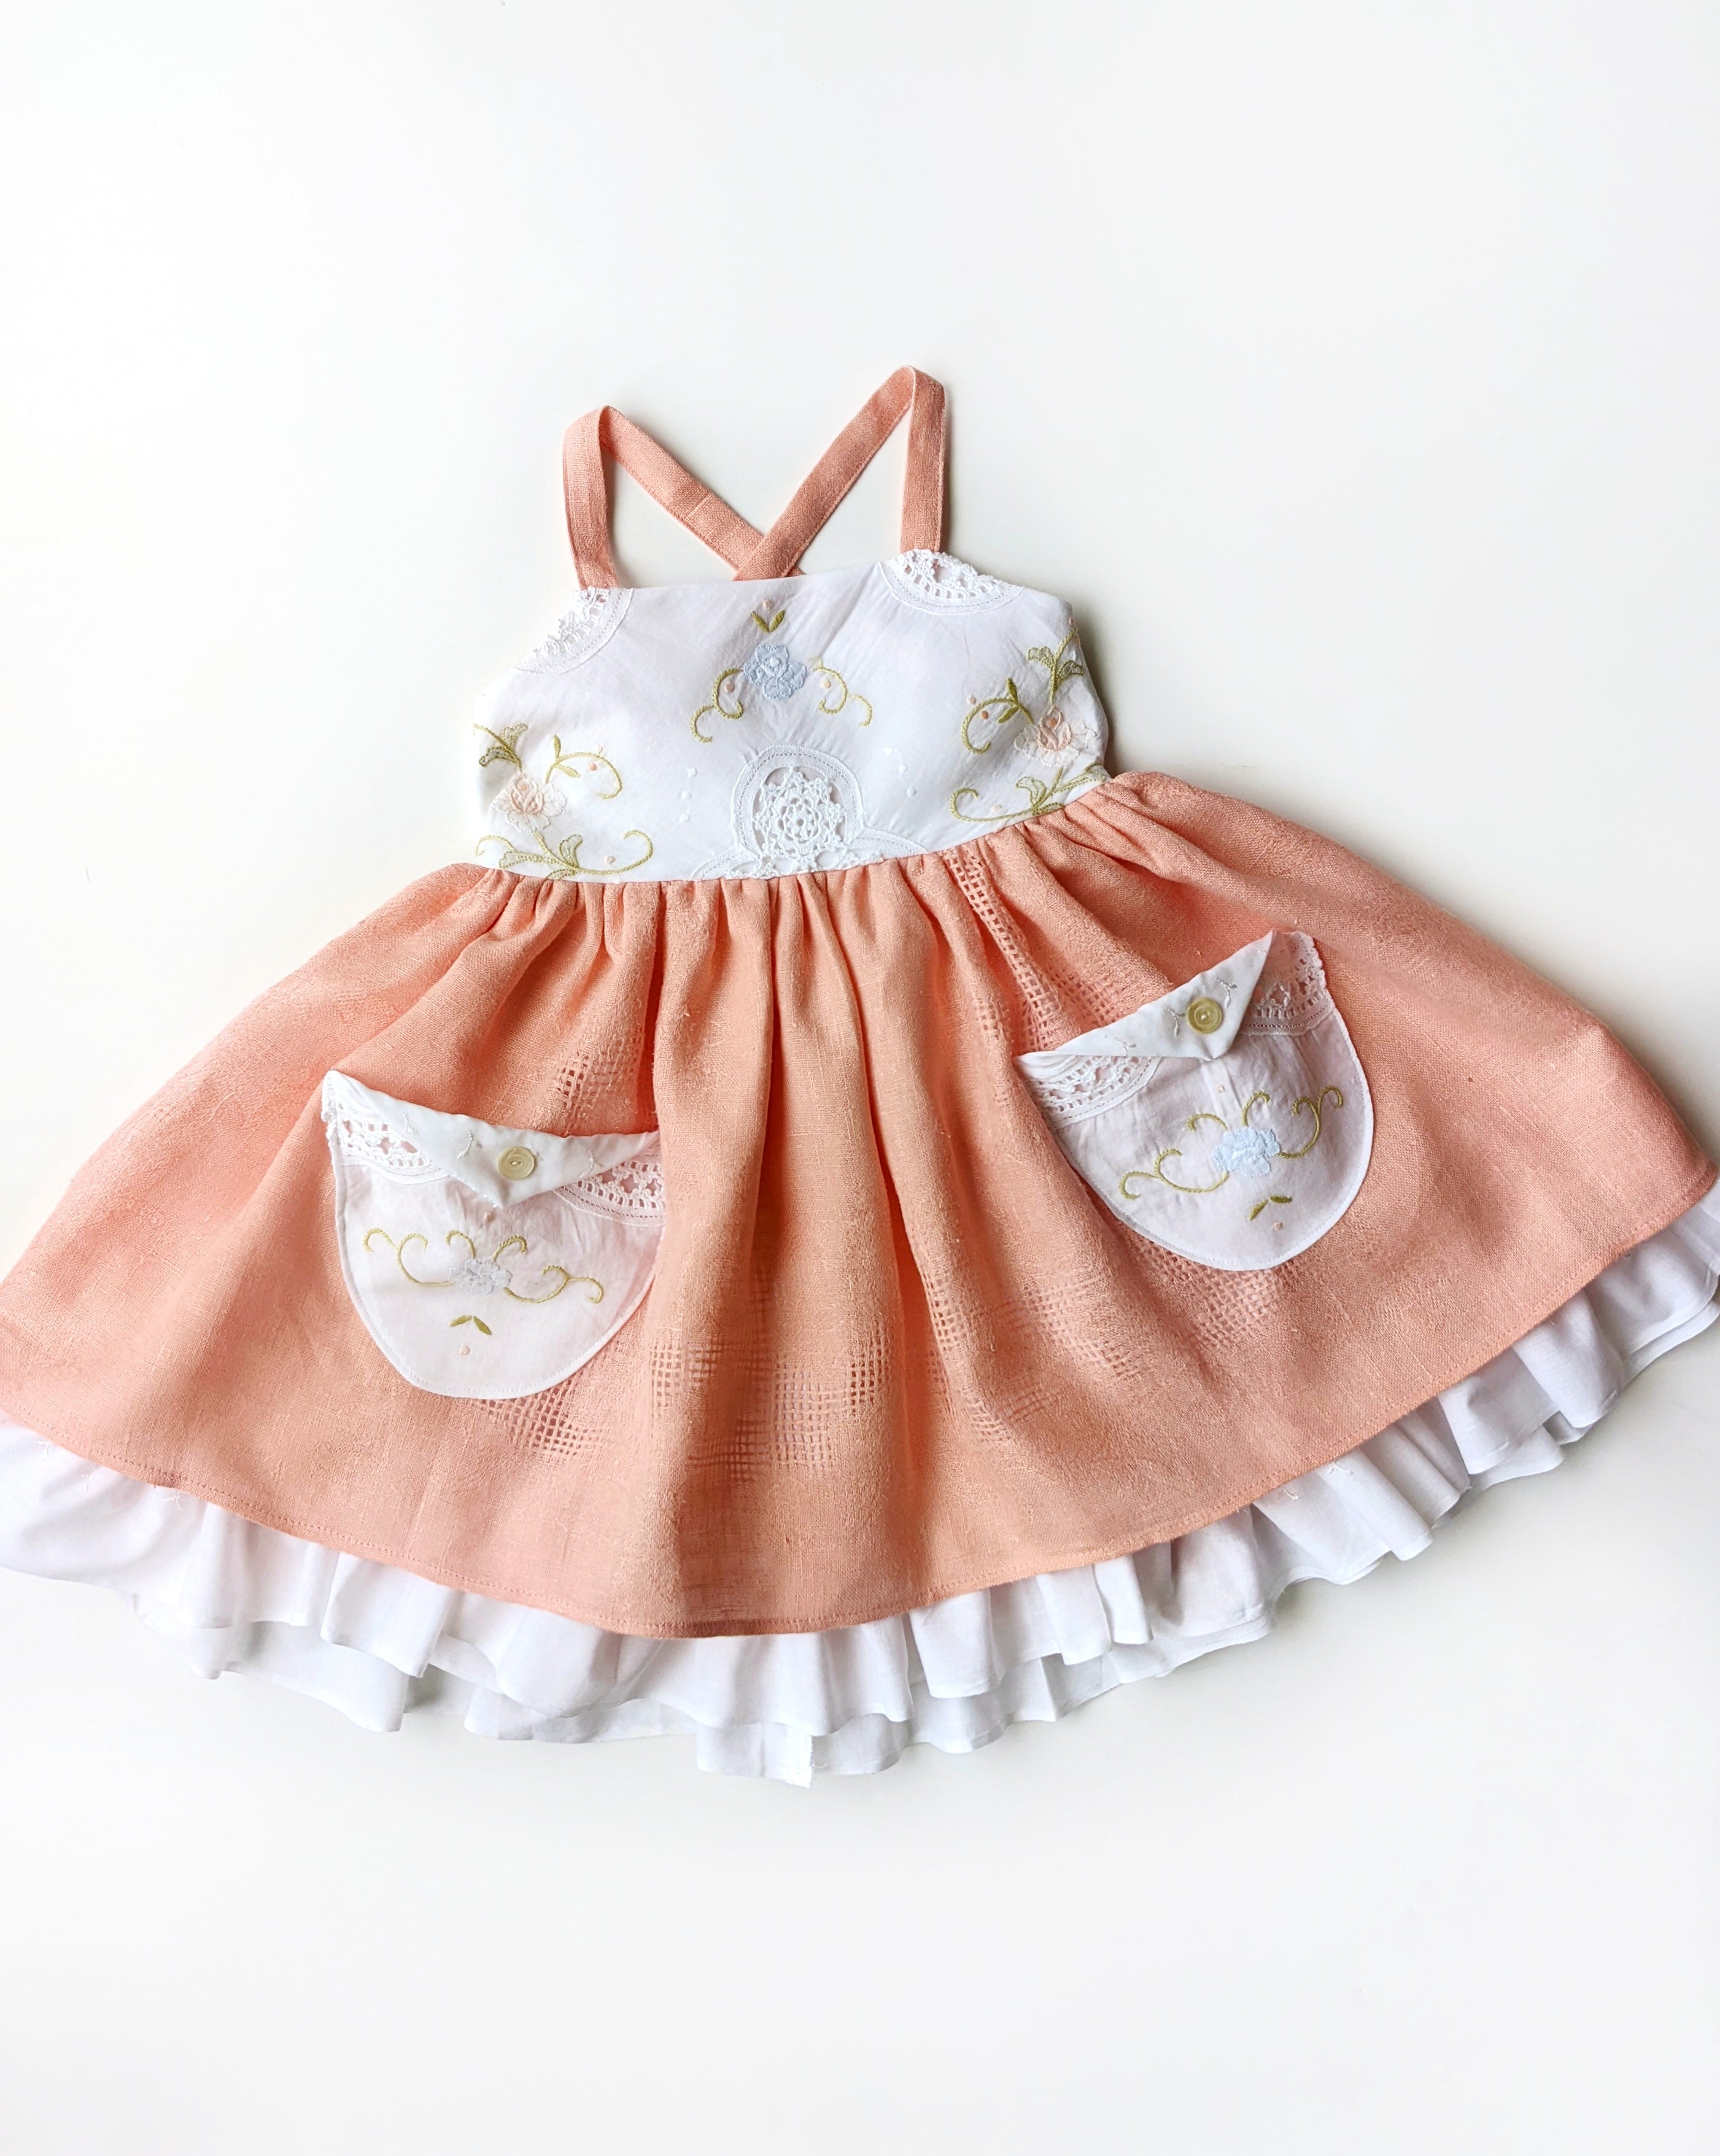 "Caila" Embroidered Zinnia Dress- Size 5T